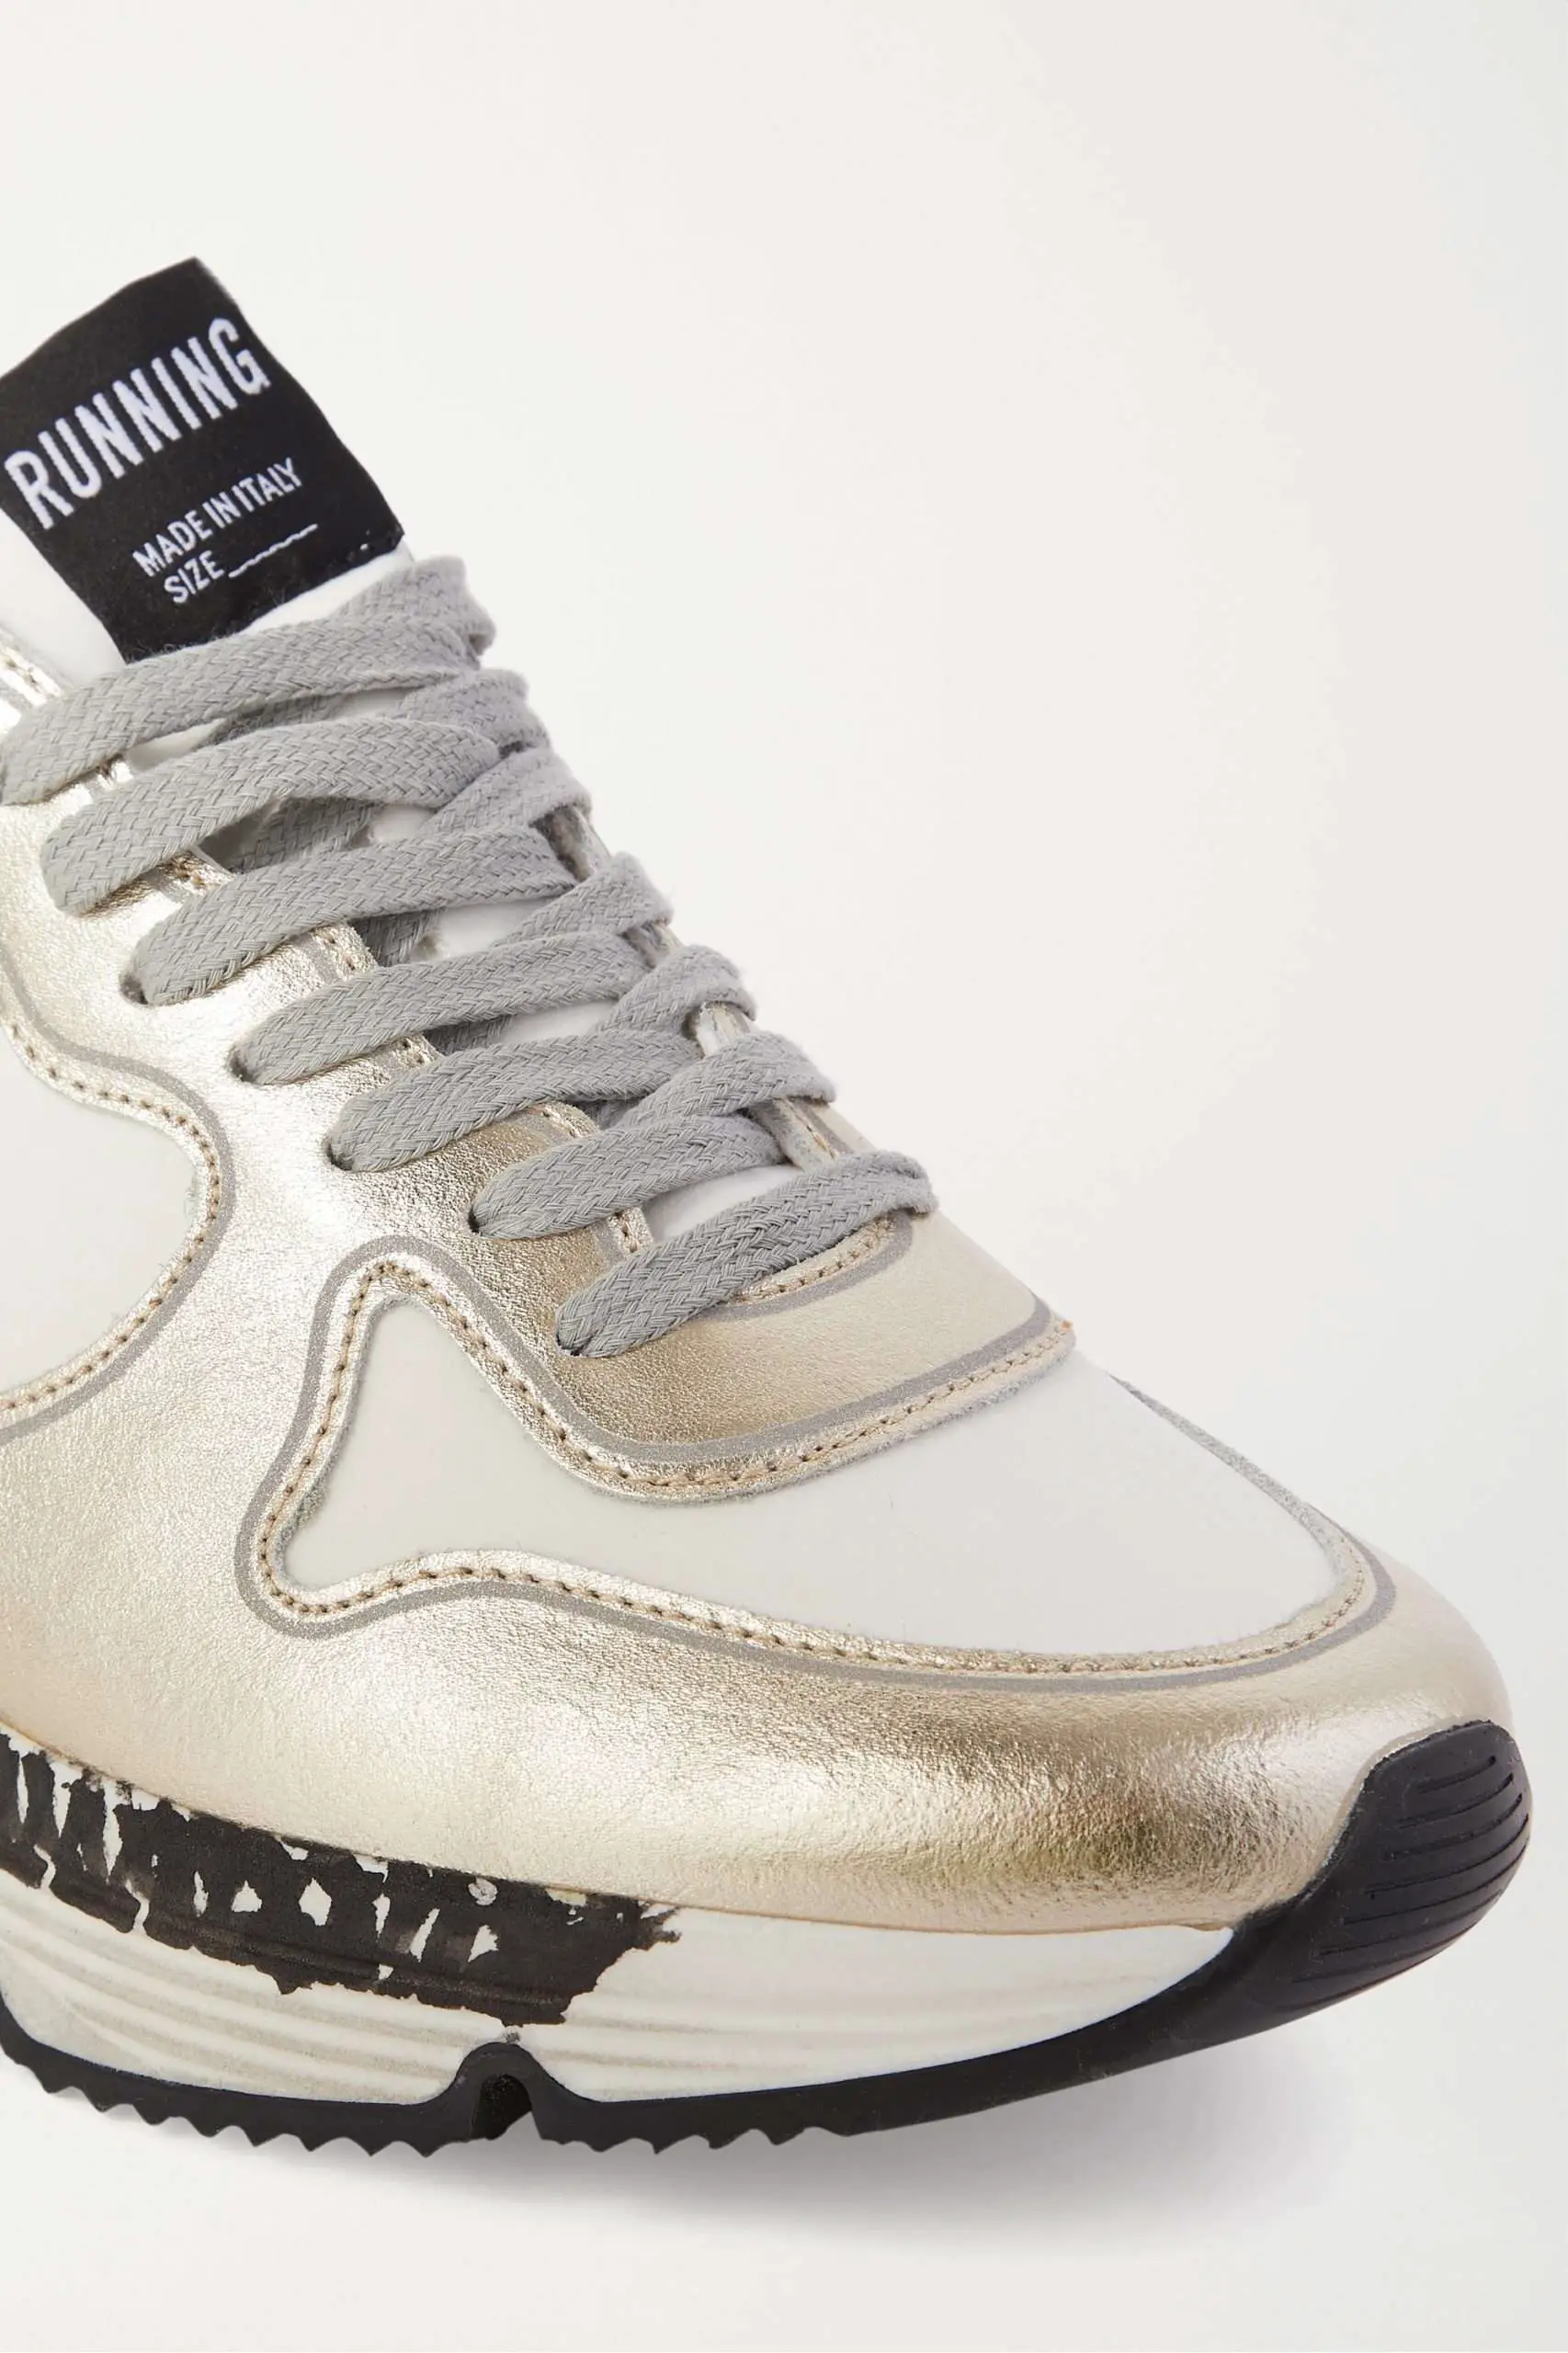 Do Golden Goose Run True To Size : The Pros And Cons Of ...